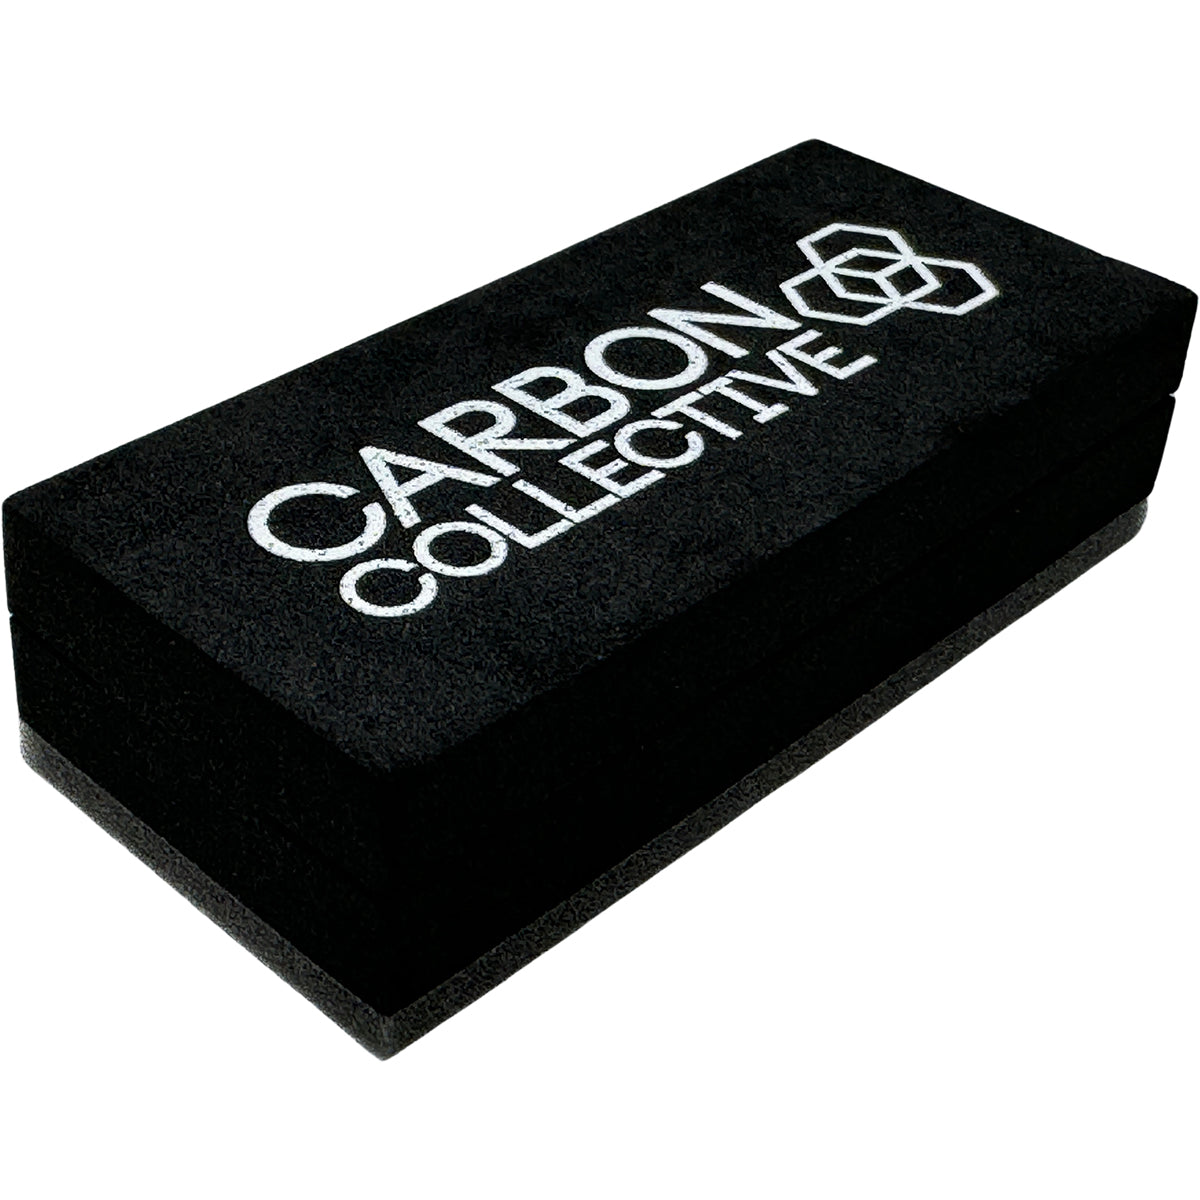 Carbon Collective Coating Application Kit